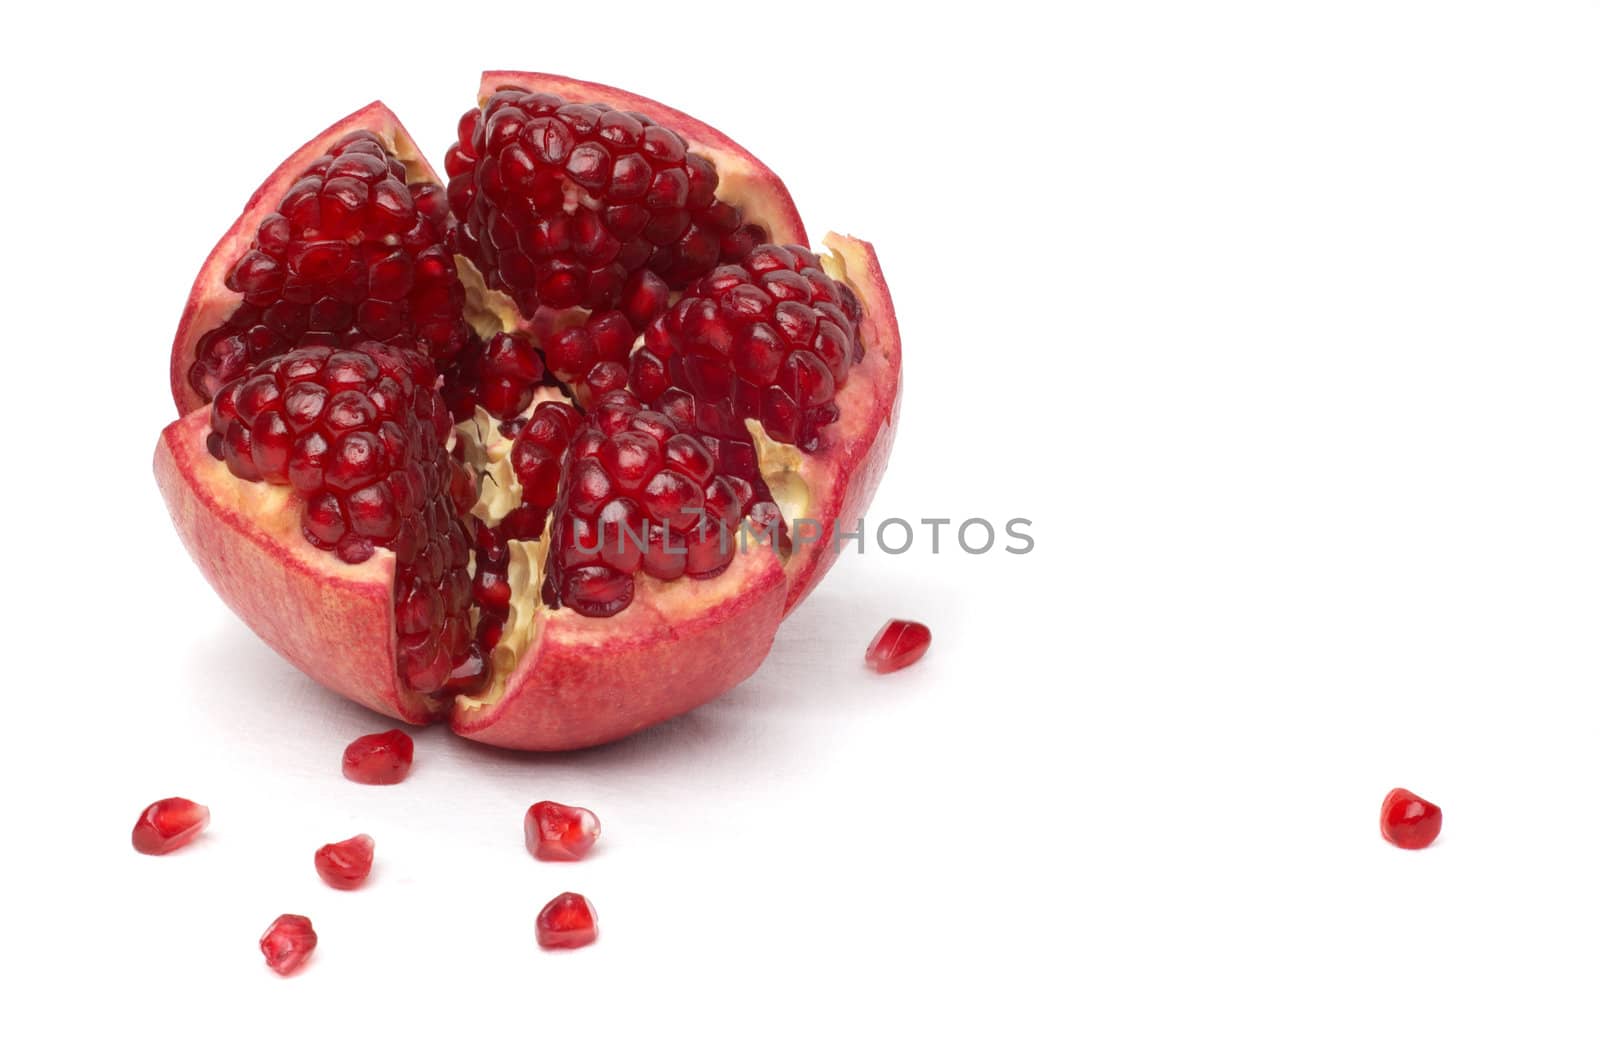 broken ripe pomegranate fruit and seeds over white cloth. isolated.